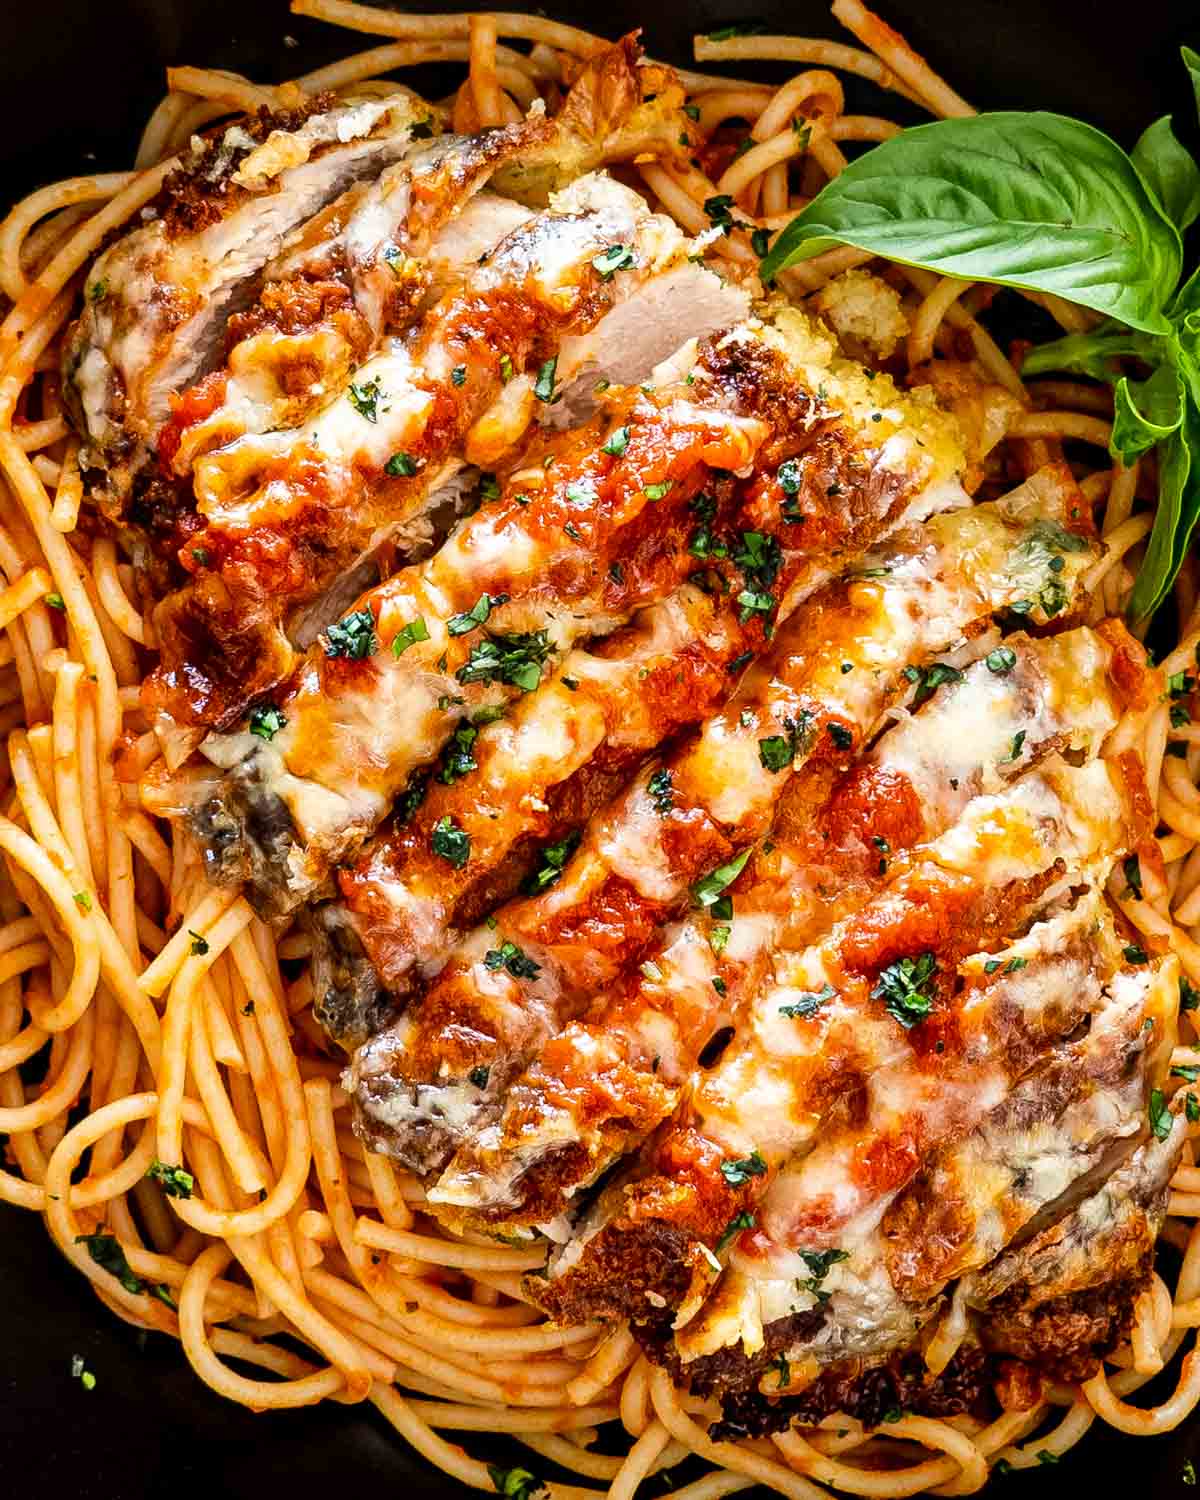 sliced up chicken parmesan on a bed of spaghetti in a black bowl.